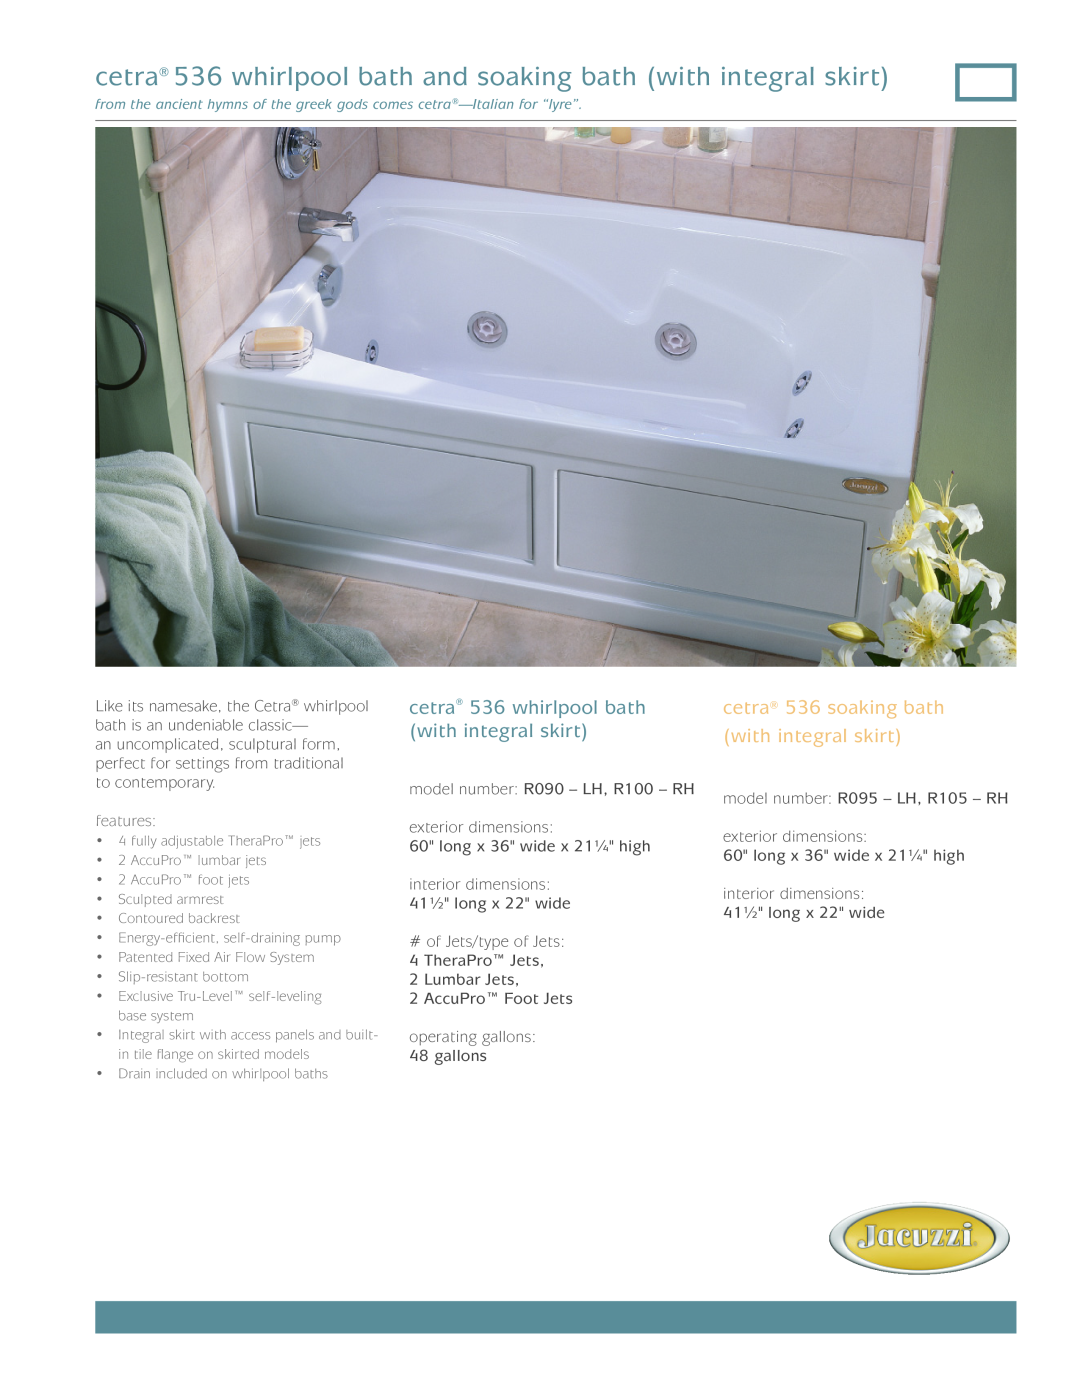 Jacuzzi R100-RH dimensions cetra 536 whirlpool bath and soaking bath with integral skirt, cetra 536 soaking bath, features 